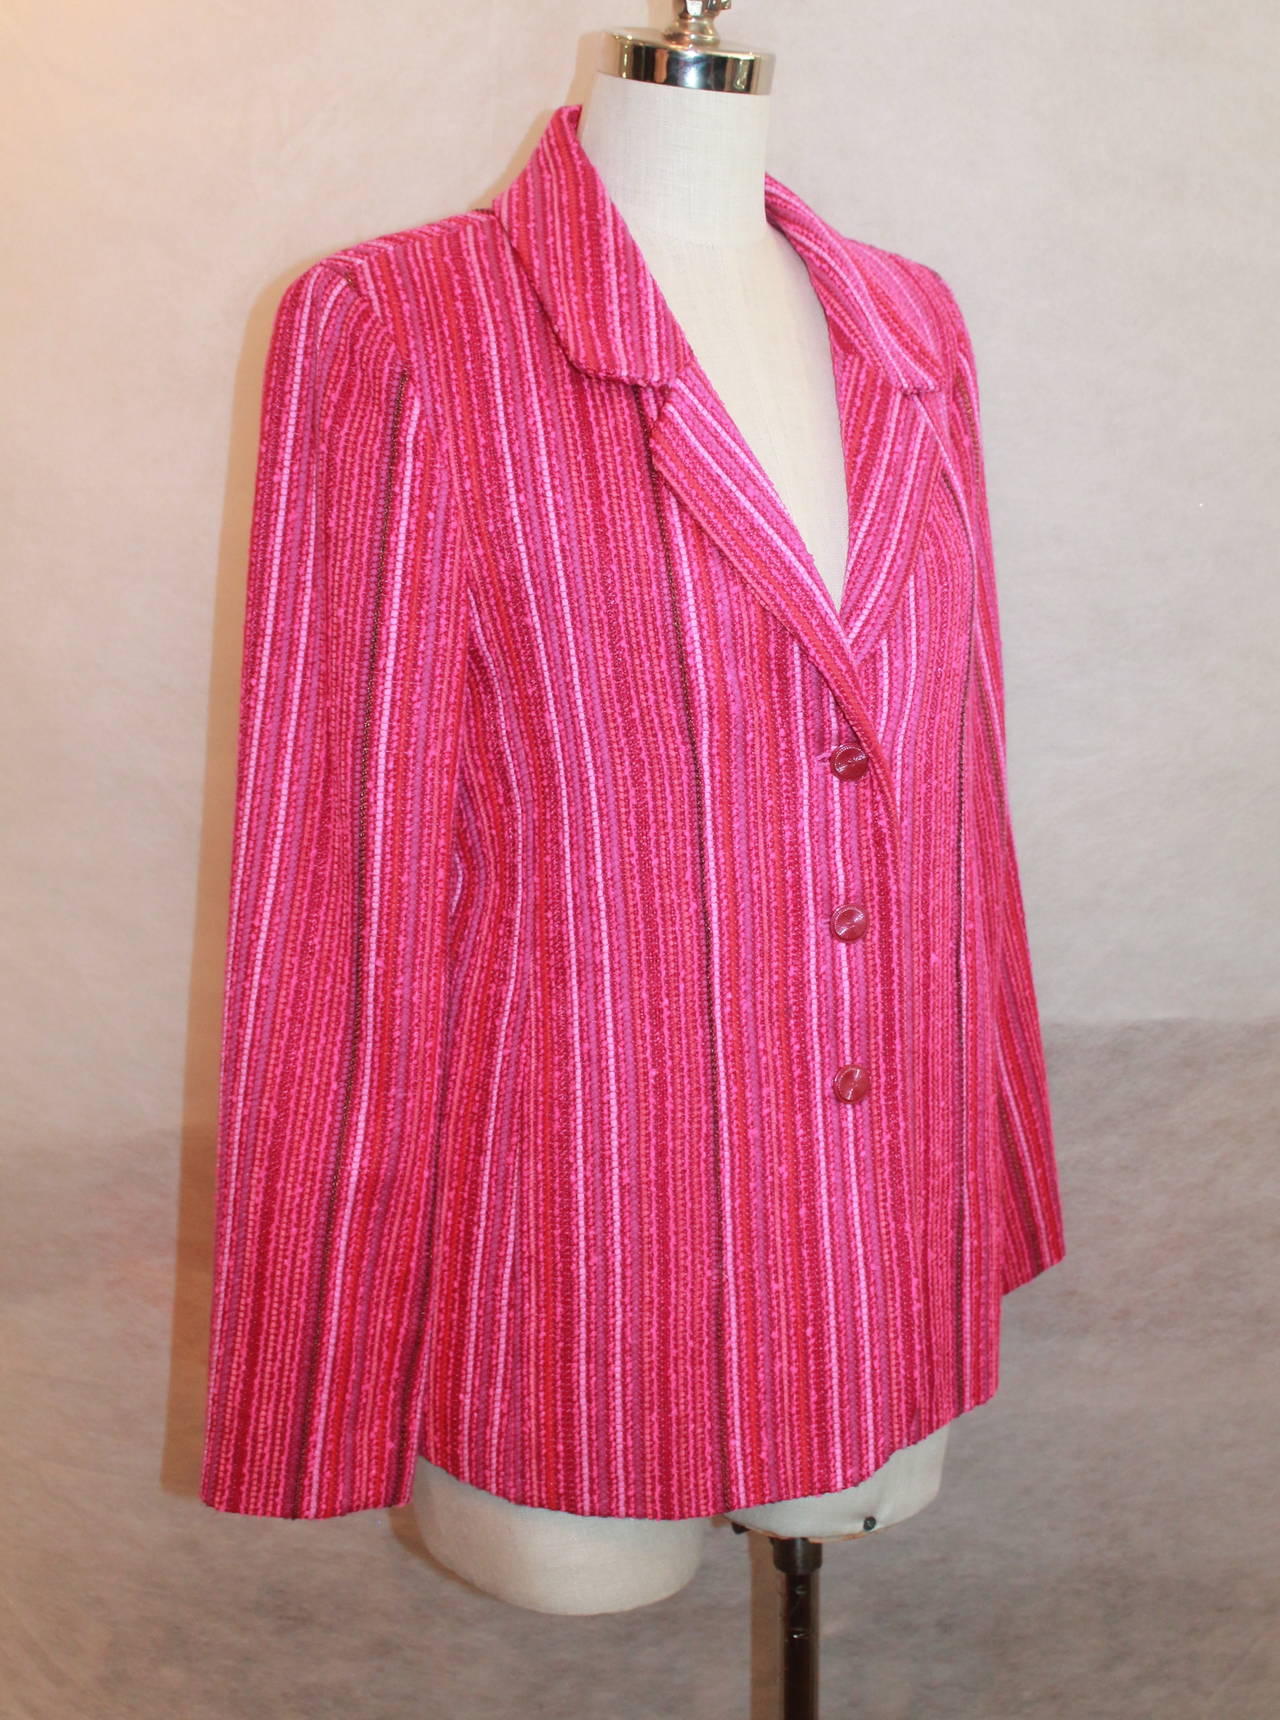 Chanel Magenta Striped Wool Blend Jacket - 40 - Circa 2001
This jacket is in good condition
Measurements:
Bust 36